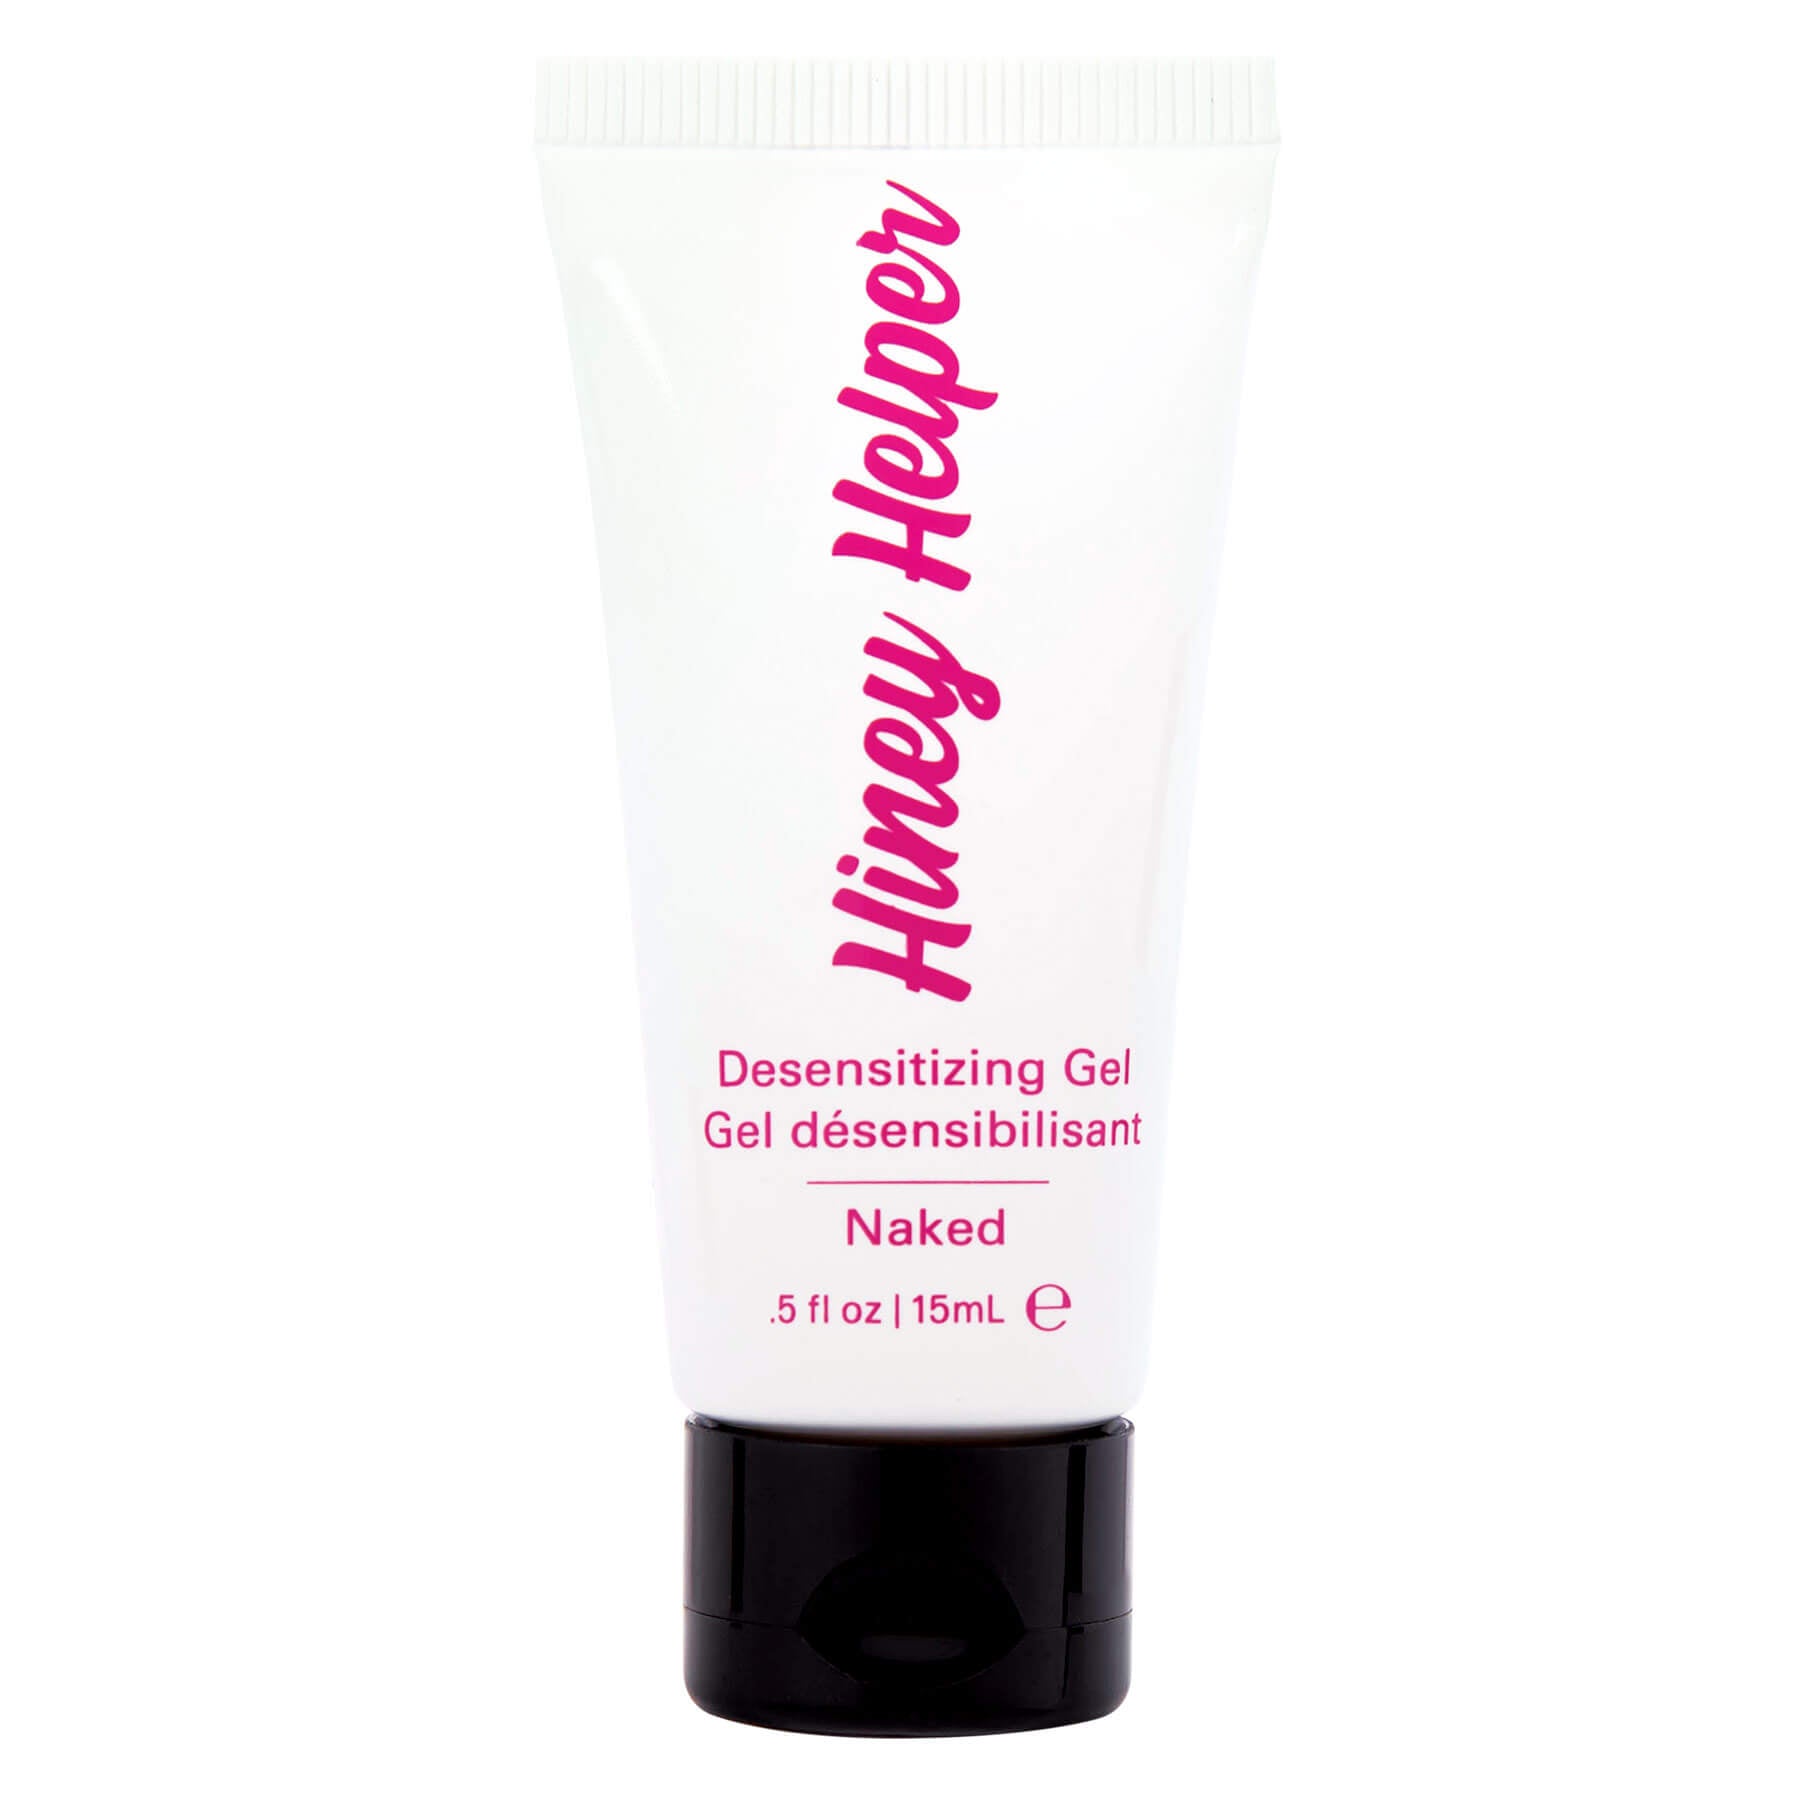 Jelique Hiney Helper Anal Calm Balm - The Bigger O online sex toy shop USA, Canada & UK shipping available